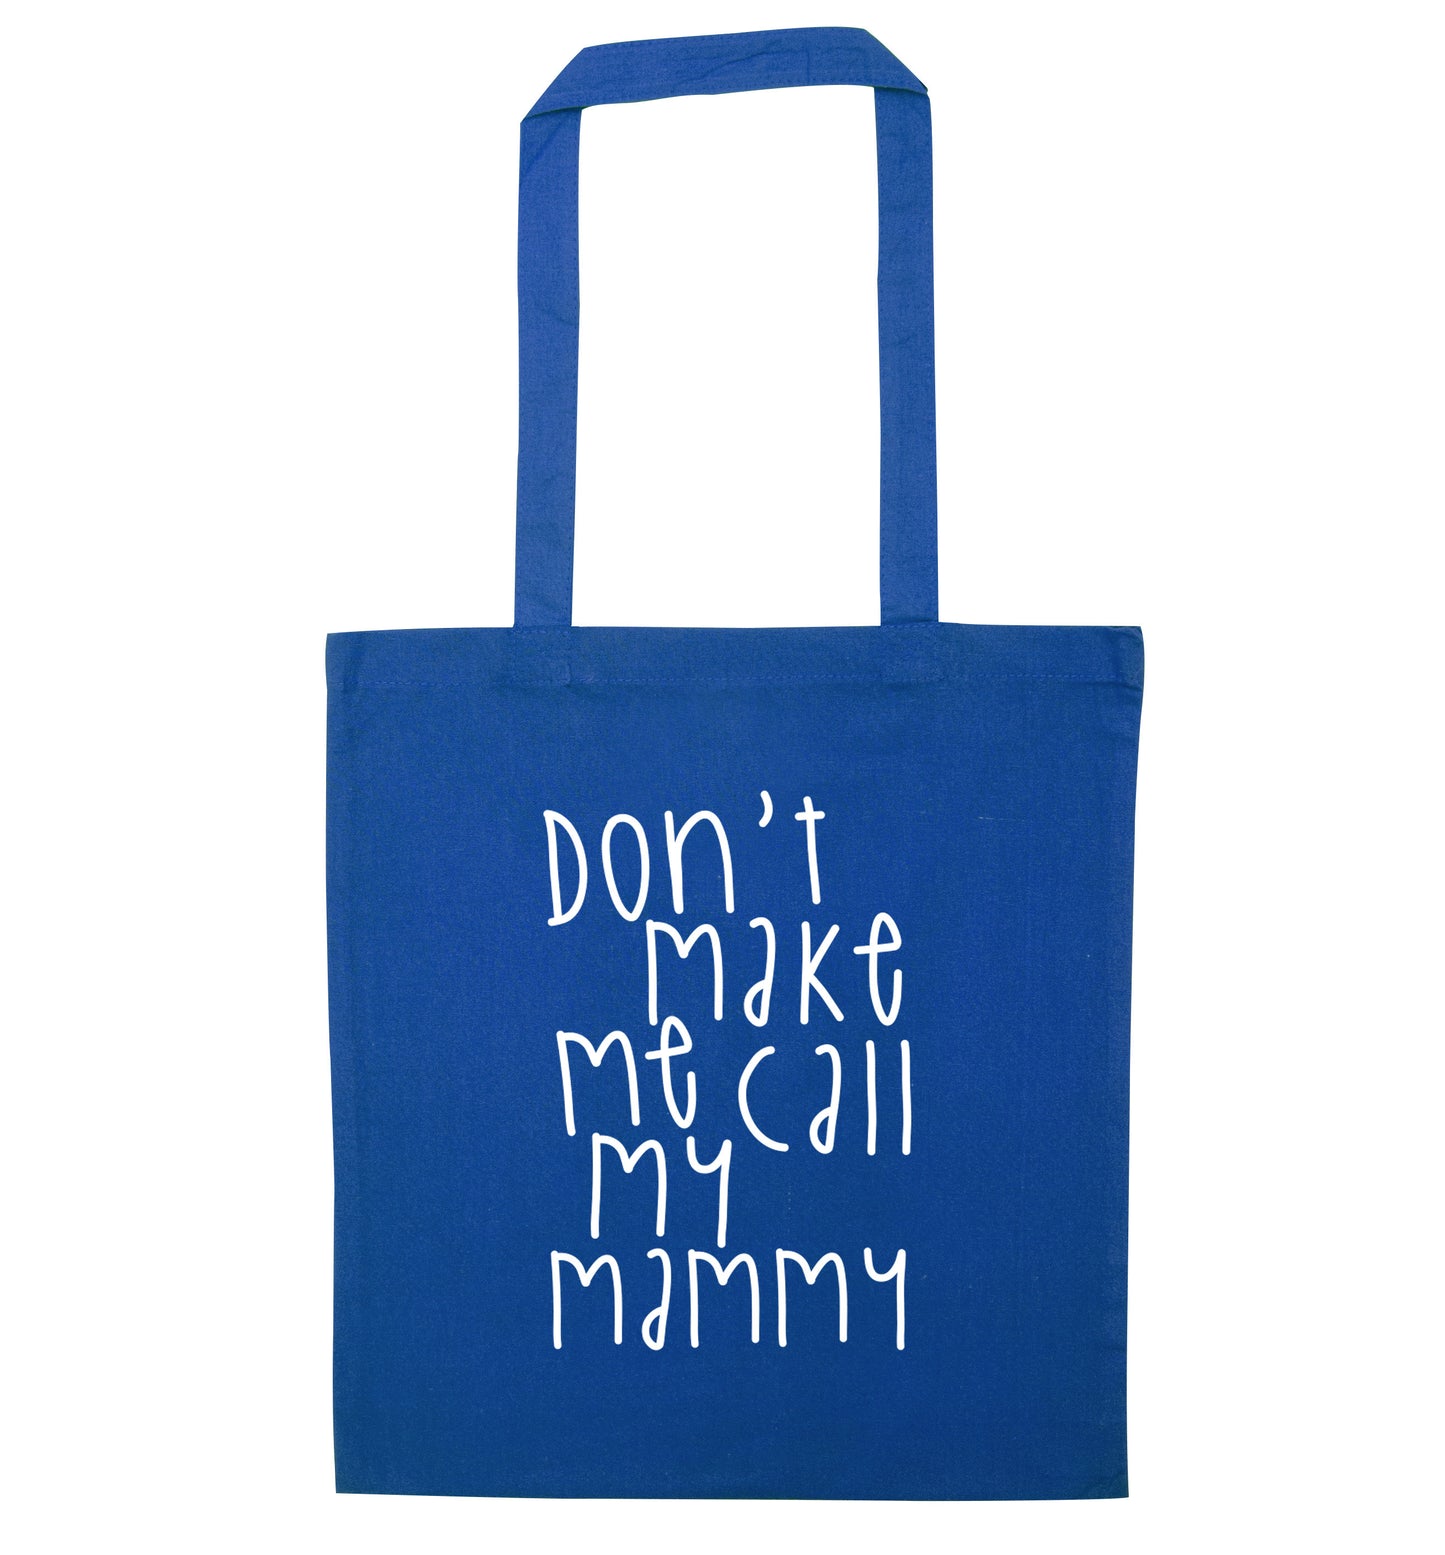 Don't make me call my mammy blue tote bag